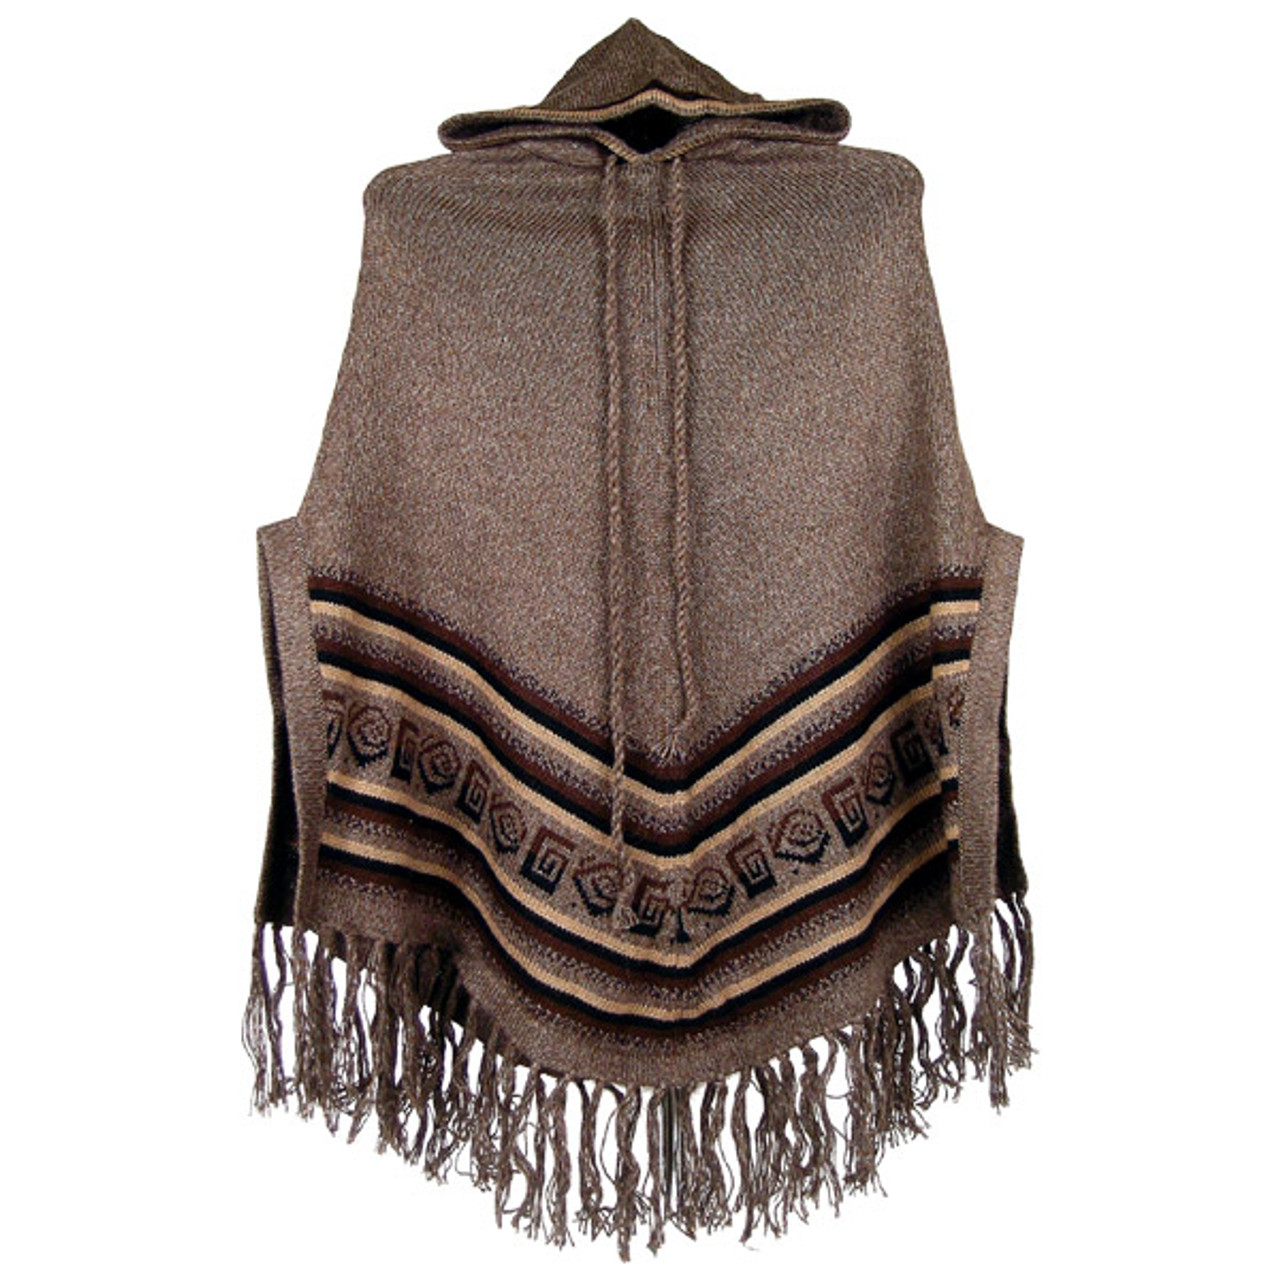 Hooded Poncho With Stripes 100% Alpaca Knit and Hood - Sanyork Fair Trade